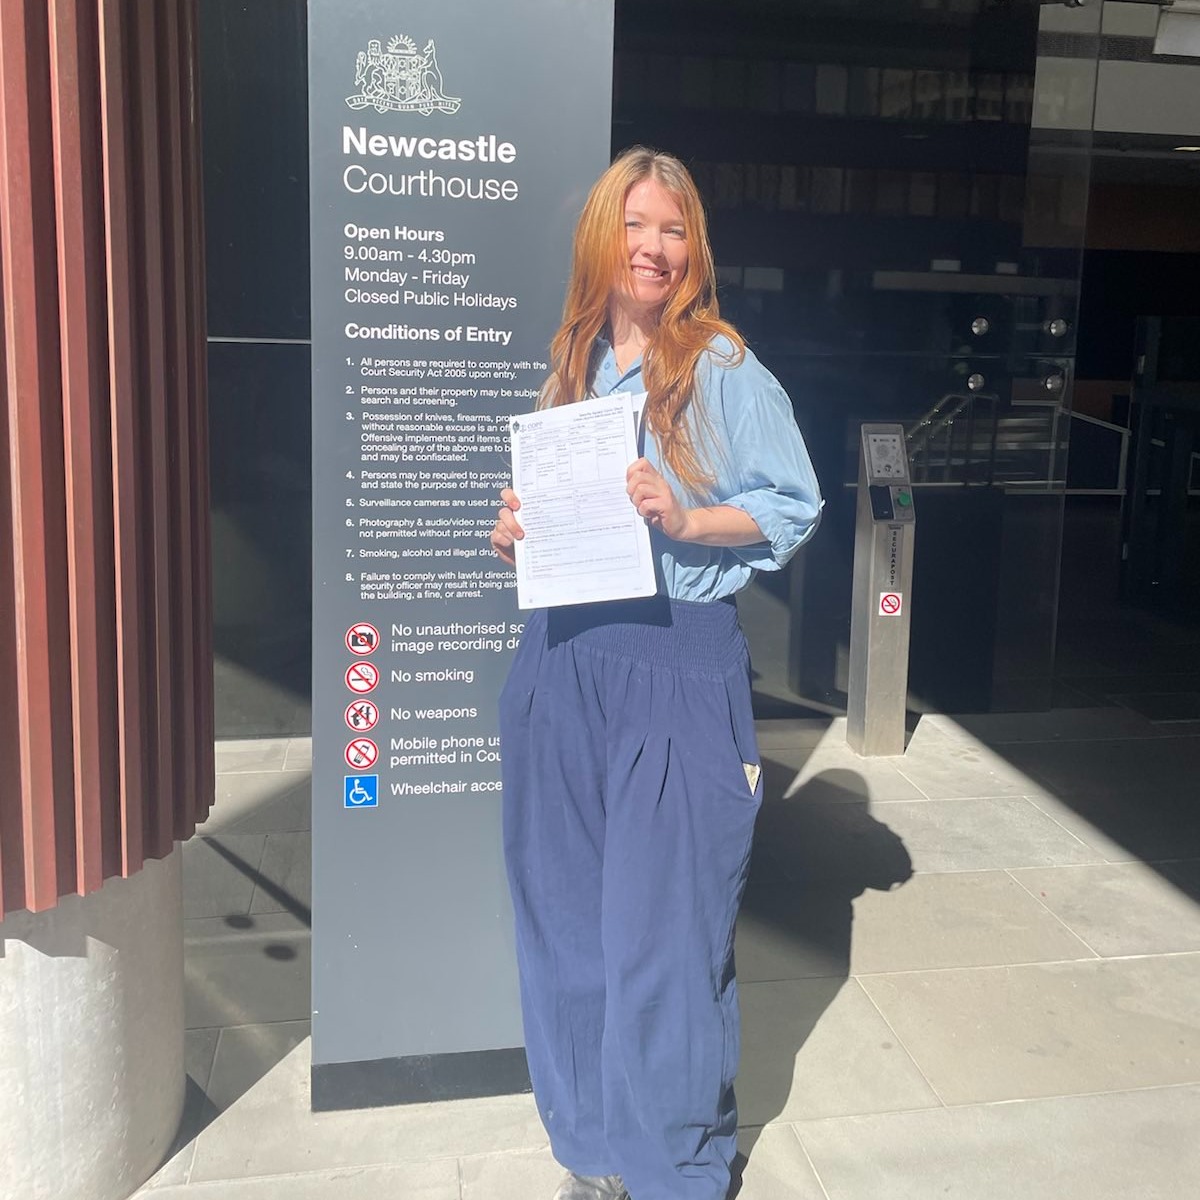 CONVICTION DROPPED! In his statement explaining why he overturned Lauren's conviction, the judge in the District Court of Appeal stated, 'the mining and export of fossil fuels is a significant issue of great concern in our society.' You are a legend, Lauren. Well done! 🌊🌊🌊